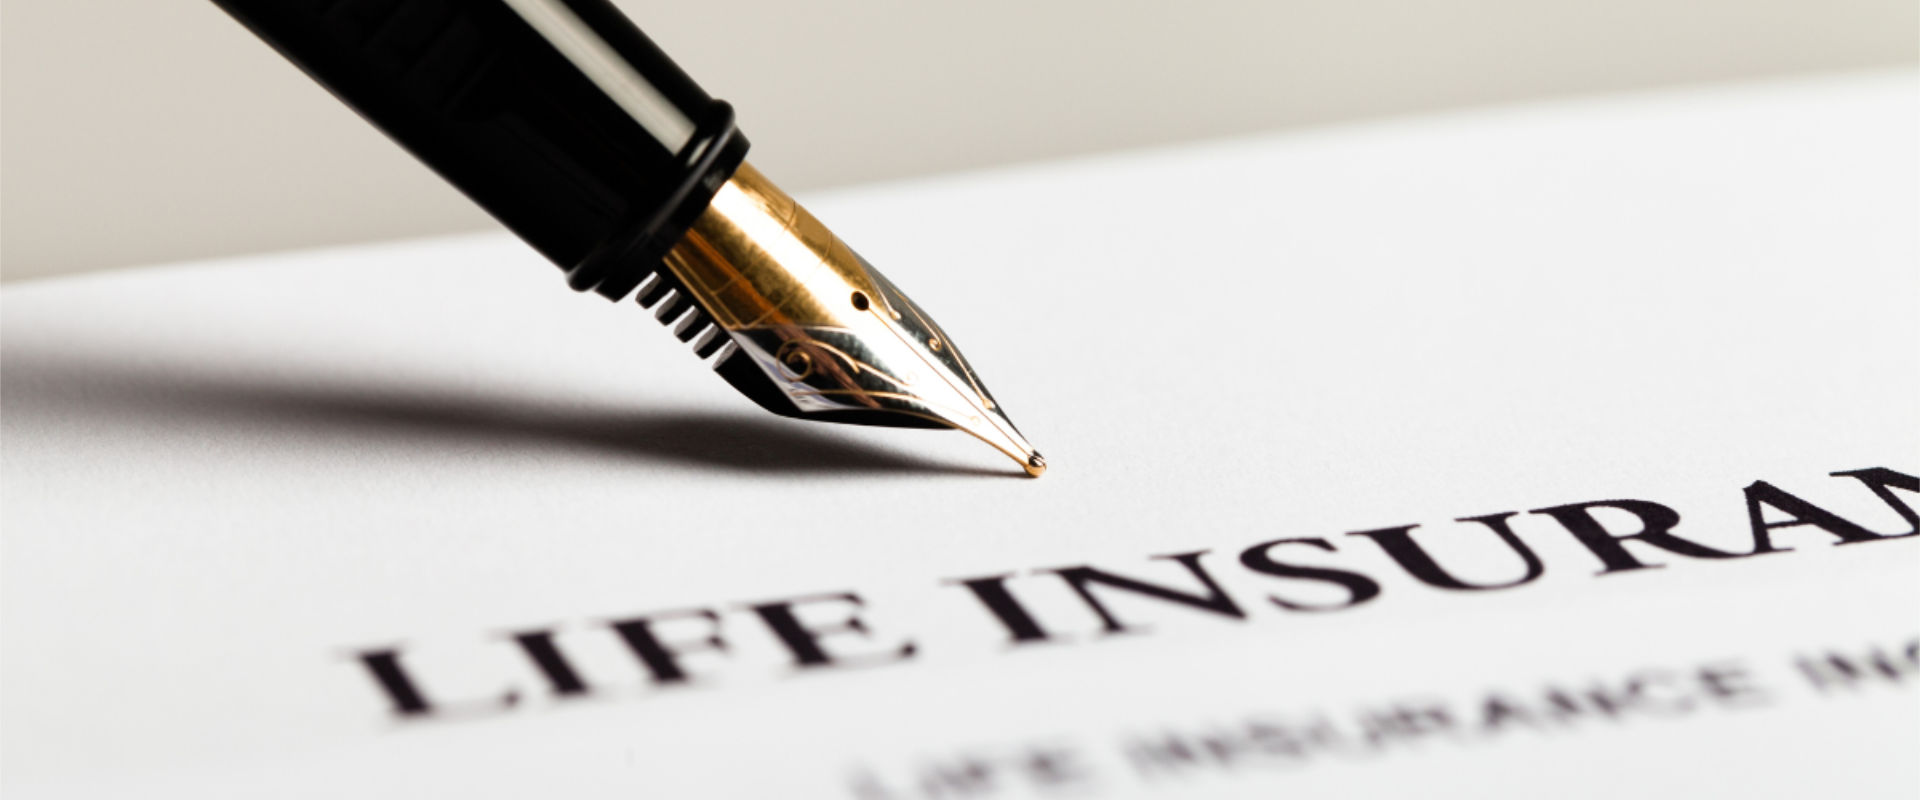 Using life Insurance to fund a buy-sell agreement - Reliance Insurance